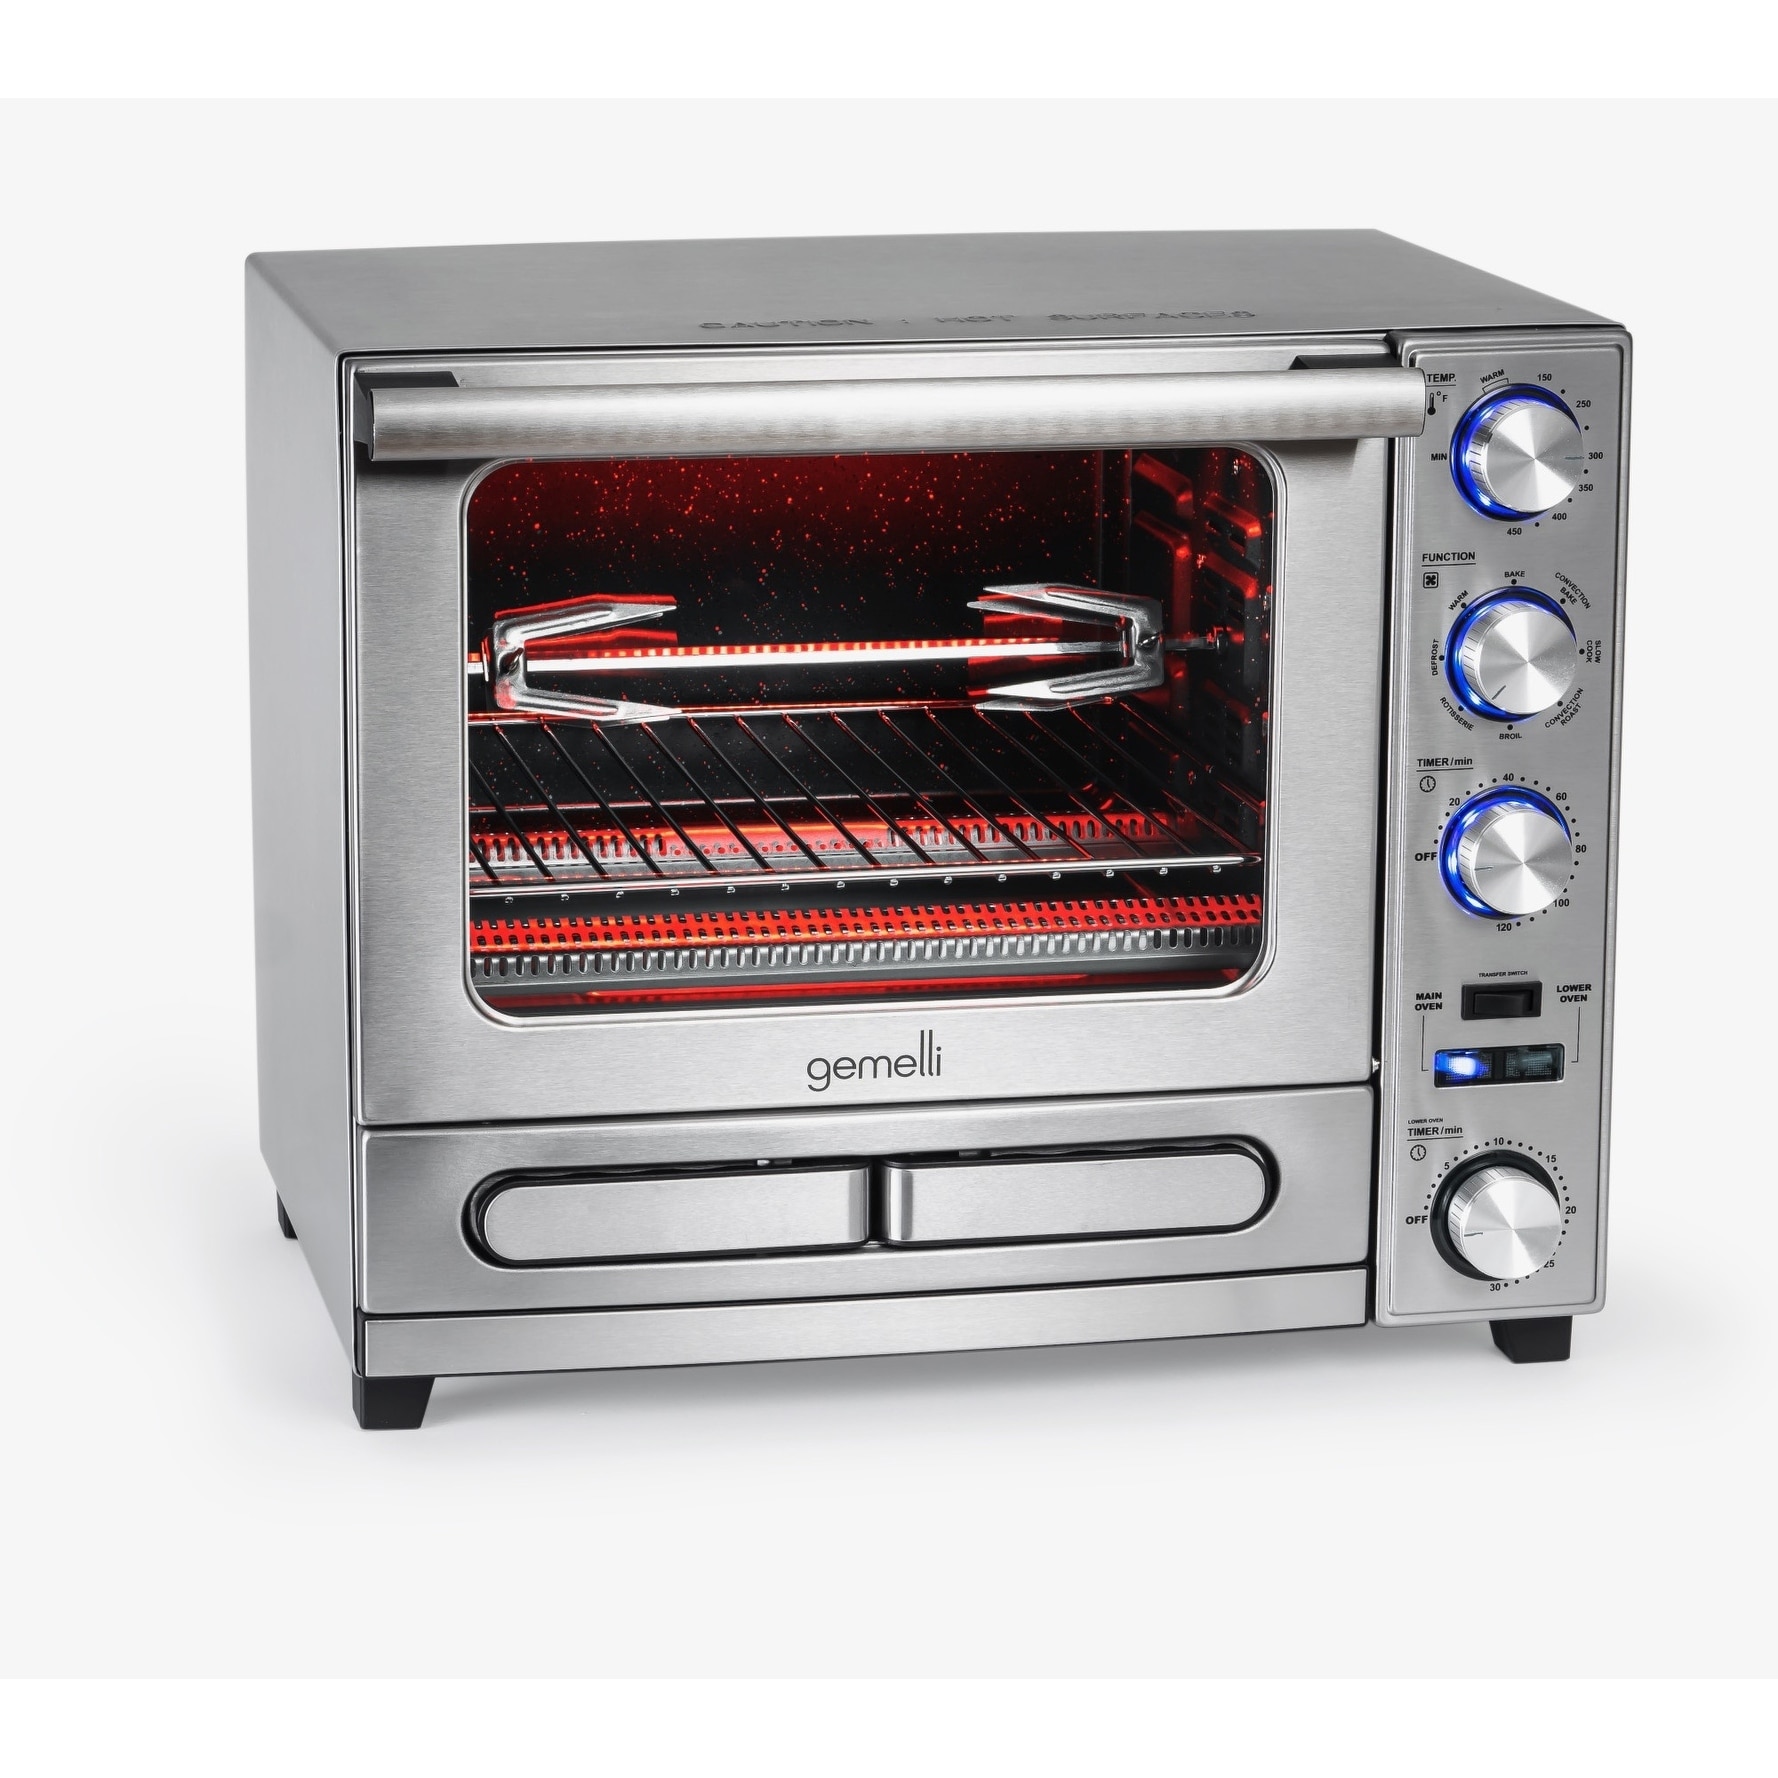 https://ak1.ostkcdn.com/images/products/27989355/Gemelli-Twin-Oven-Convection-Oven-with-Built-In-Pizza-Drawer-and-Rotisserie-Stainless-Steel-Finish-7c251a31-d330-467a-bc2c-788bd2f9ddaf.jpg